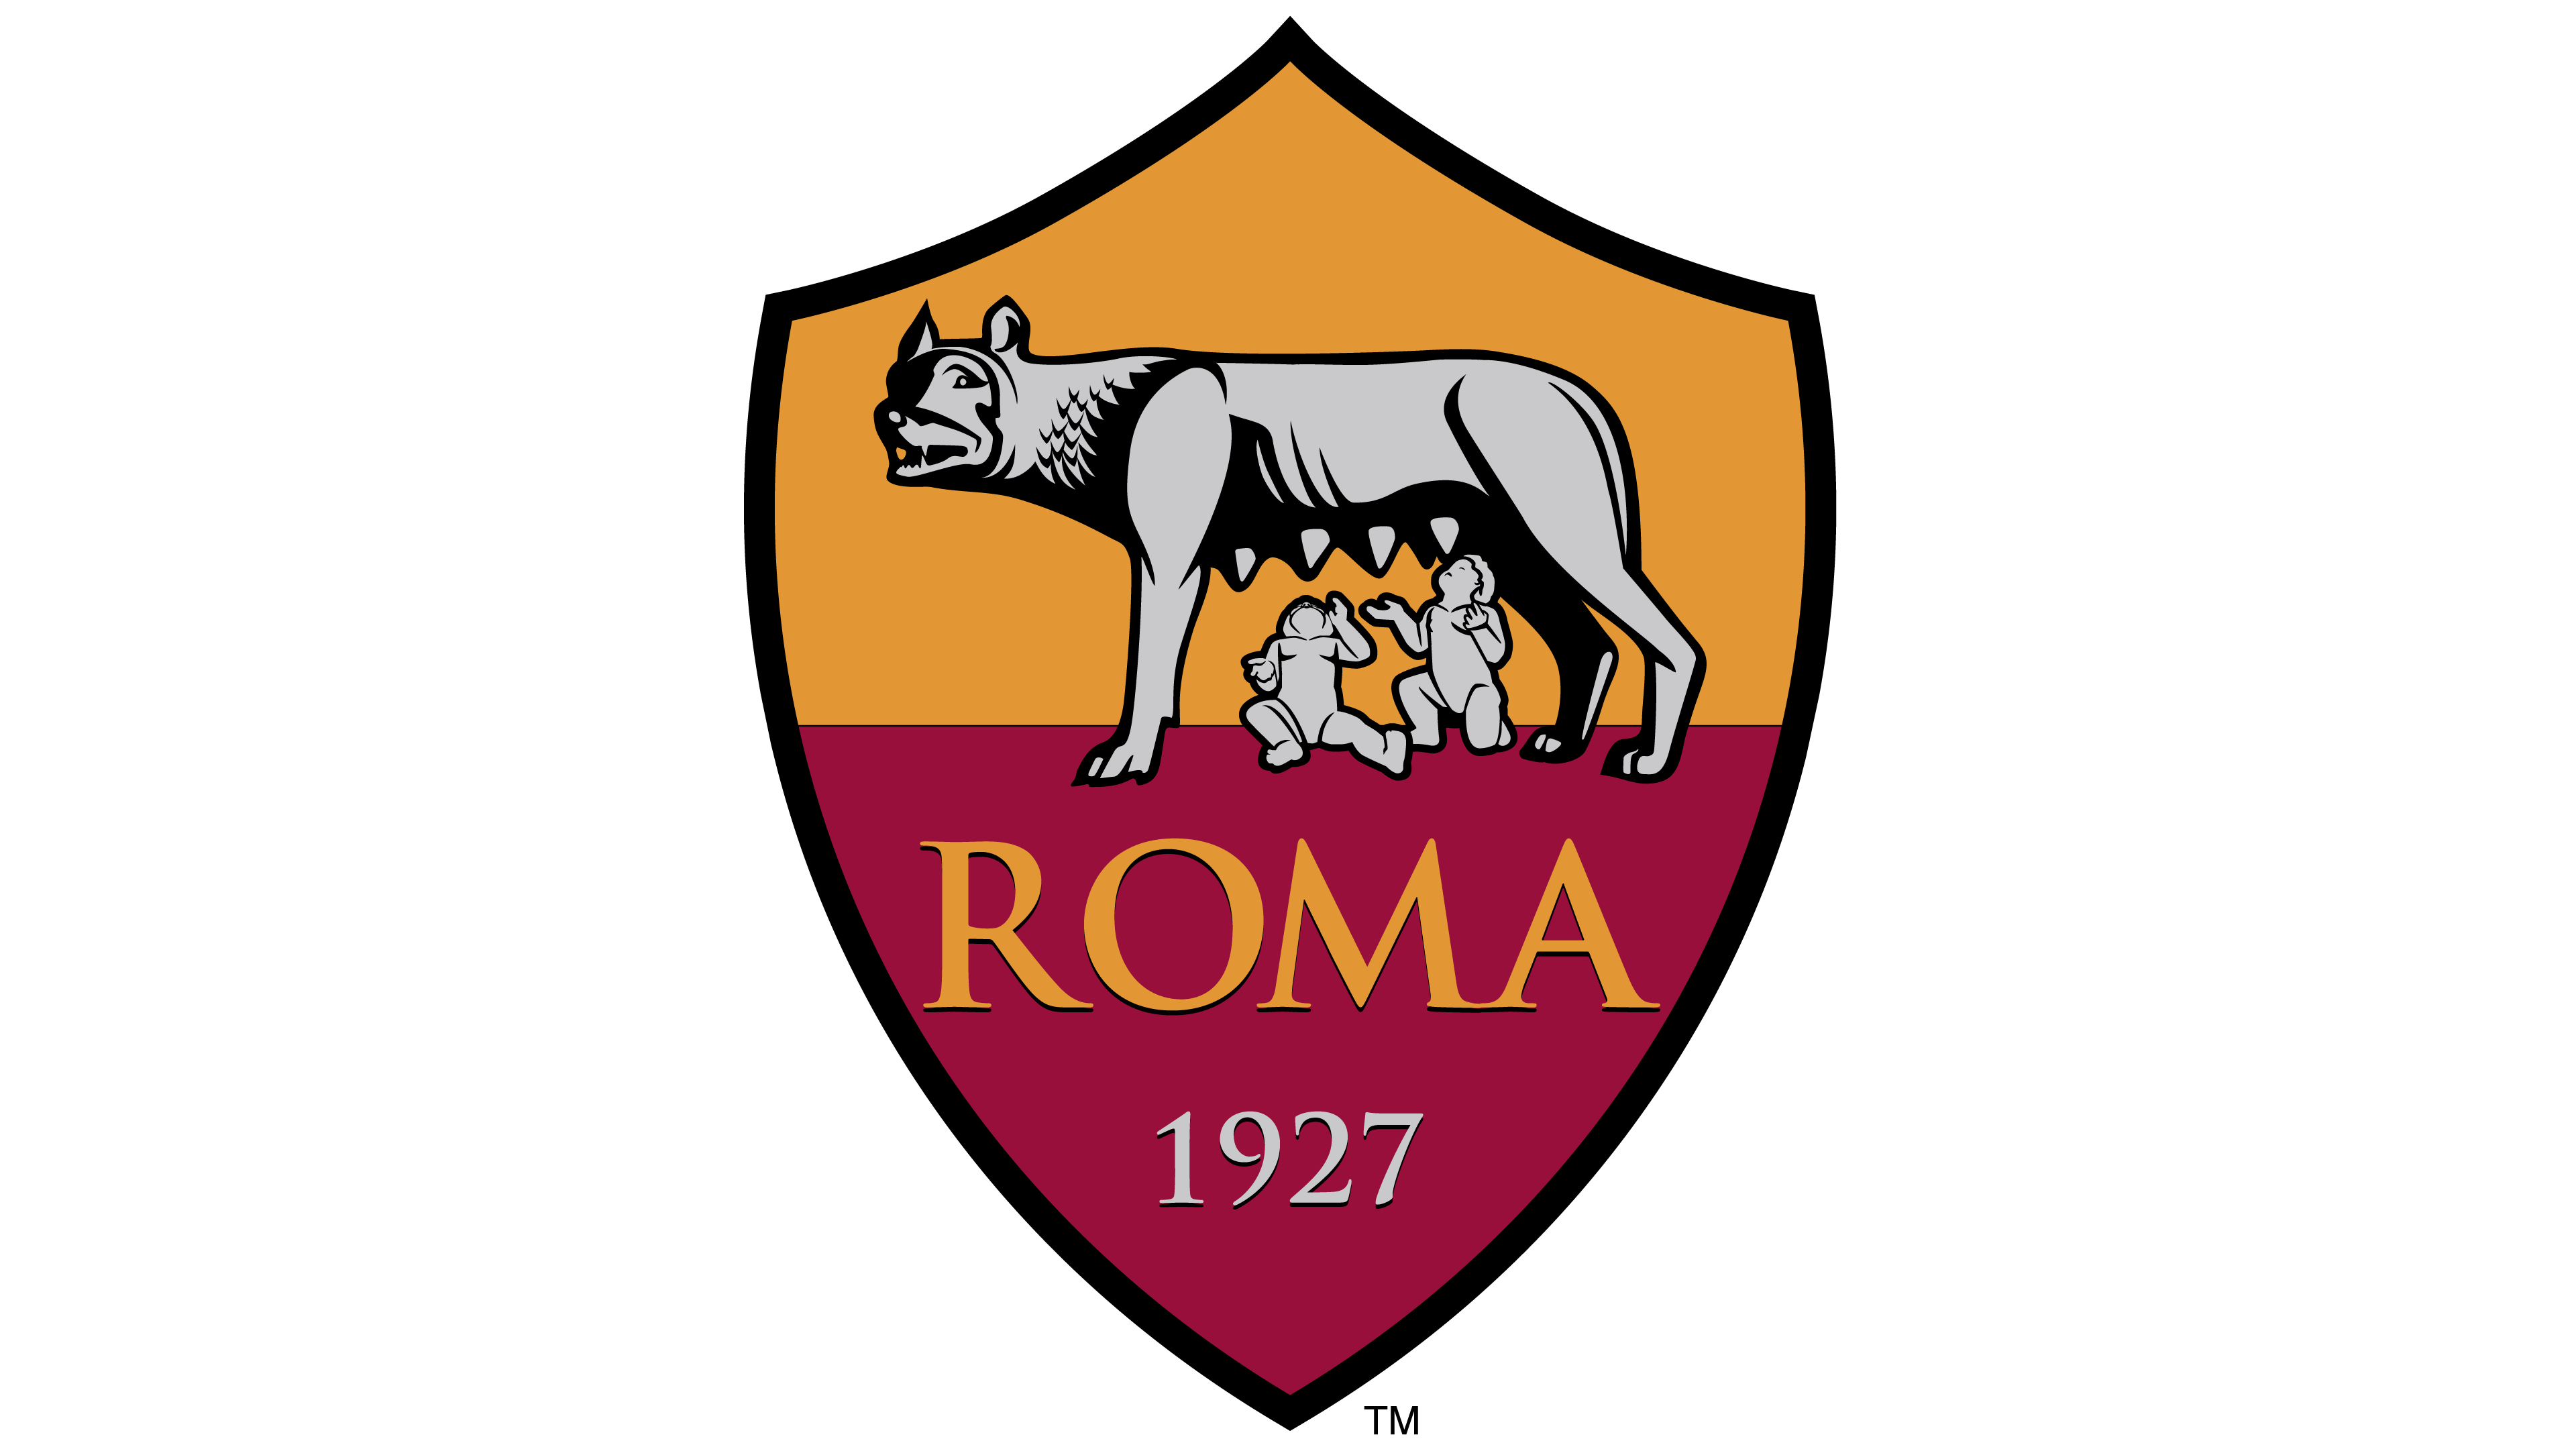 Colorful Wolf Logo - Roma logo - Interesting History of the Team Name and emblem